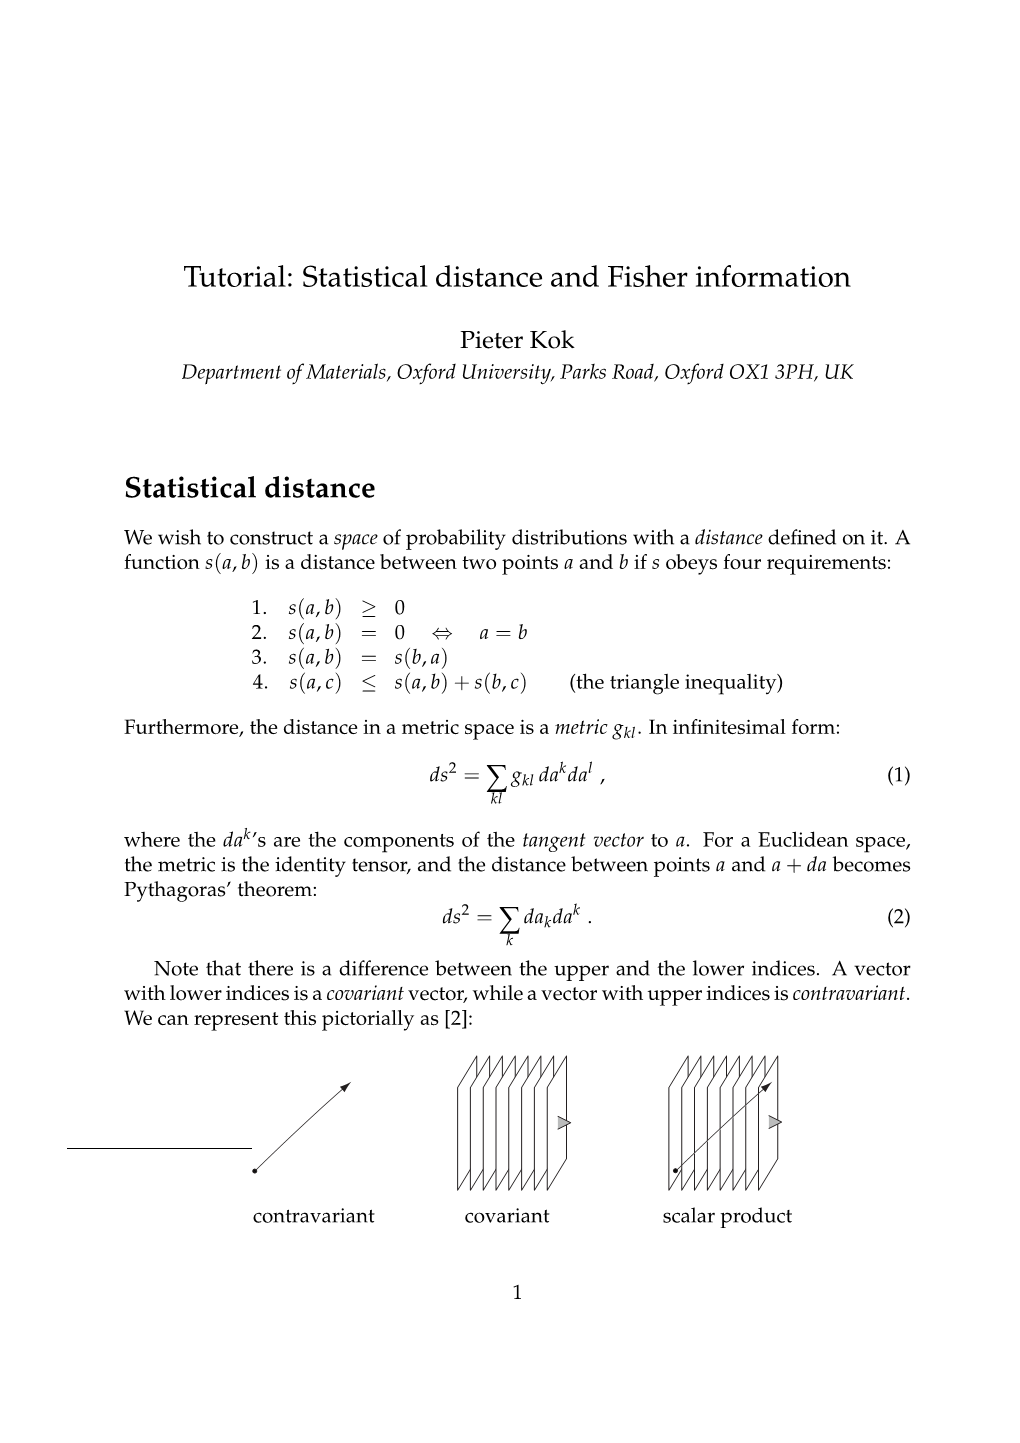 Tutorial: Statistical Distance and Fisher Information